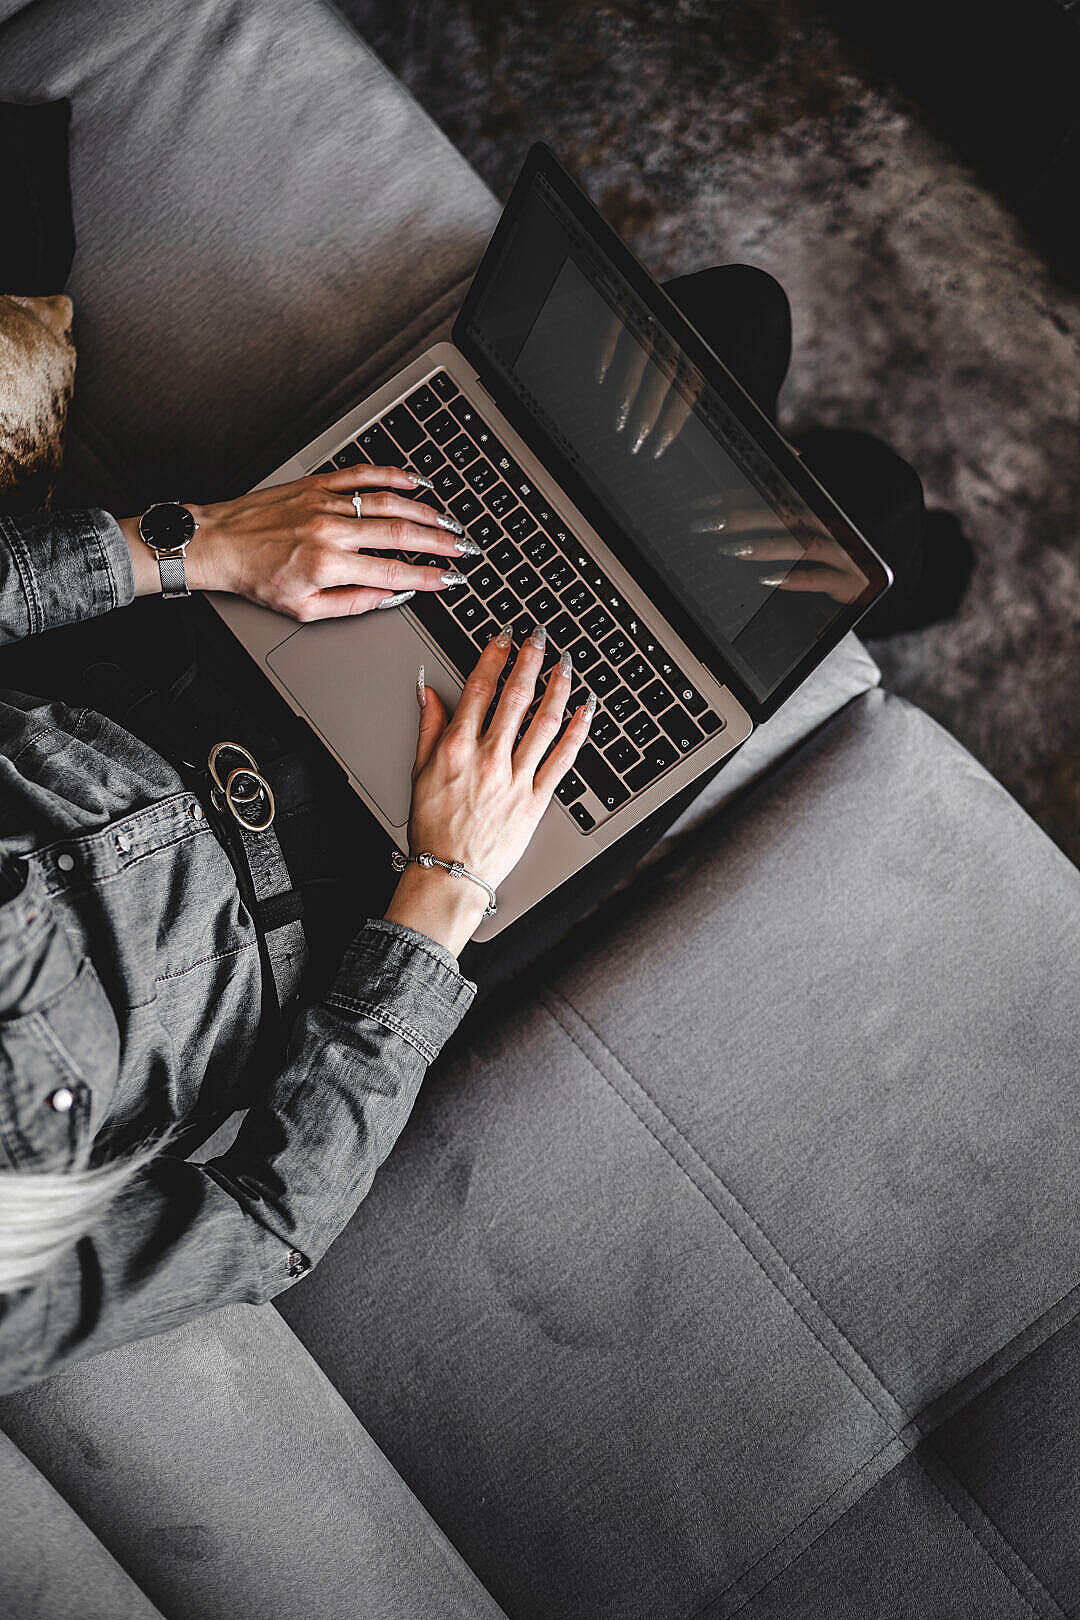 Download Woman Typing on Her Laptop on a Sofa FREE Stock Photo